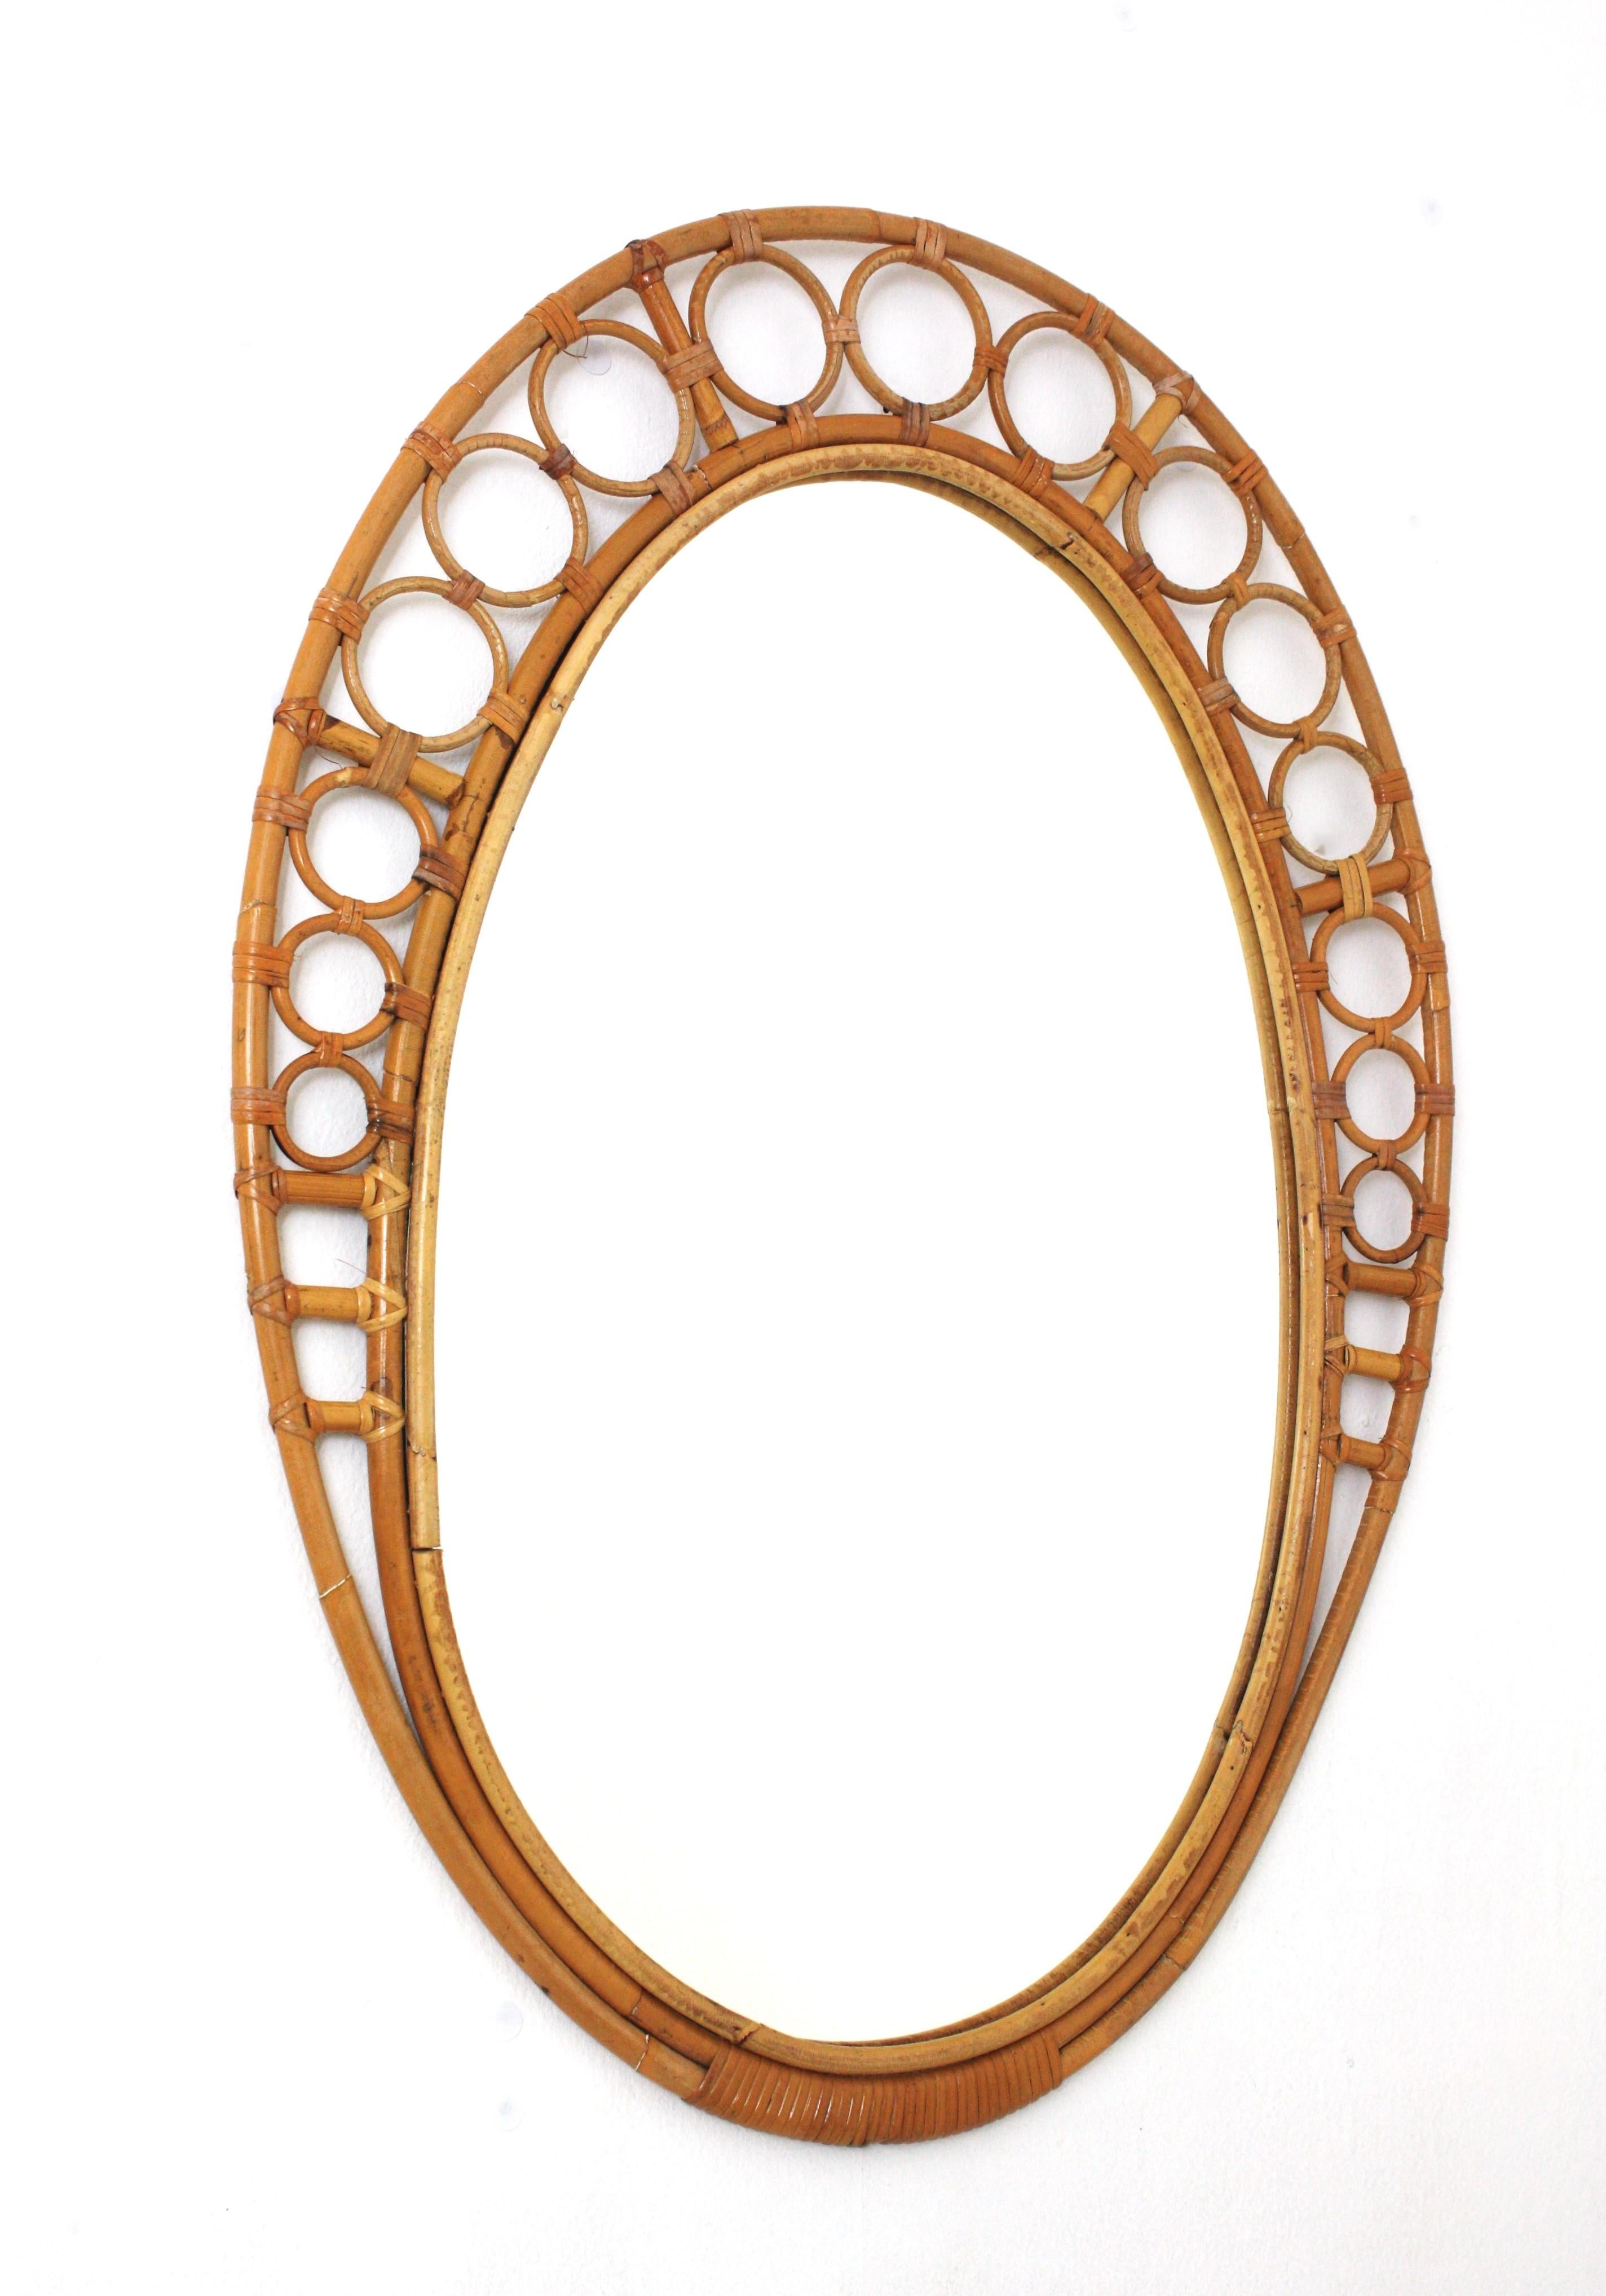 Large Oval Midcentury Rattan Bamboo Mirror. Spain, 1960s.
This wall mirror features an oval mirror glass framed by a bamboo / rattan frame with ring or circle details on the top and wicker / rattan tied accents.
Beautiful placed alone on a powder